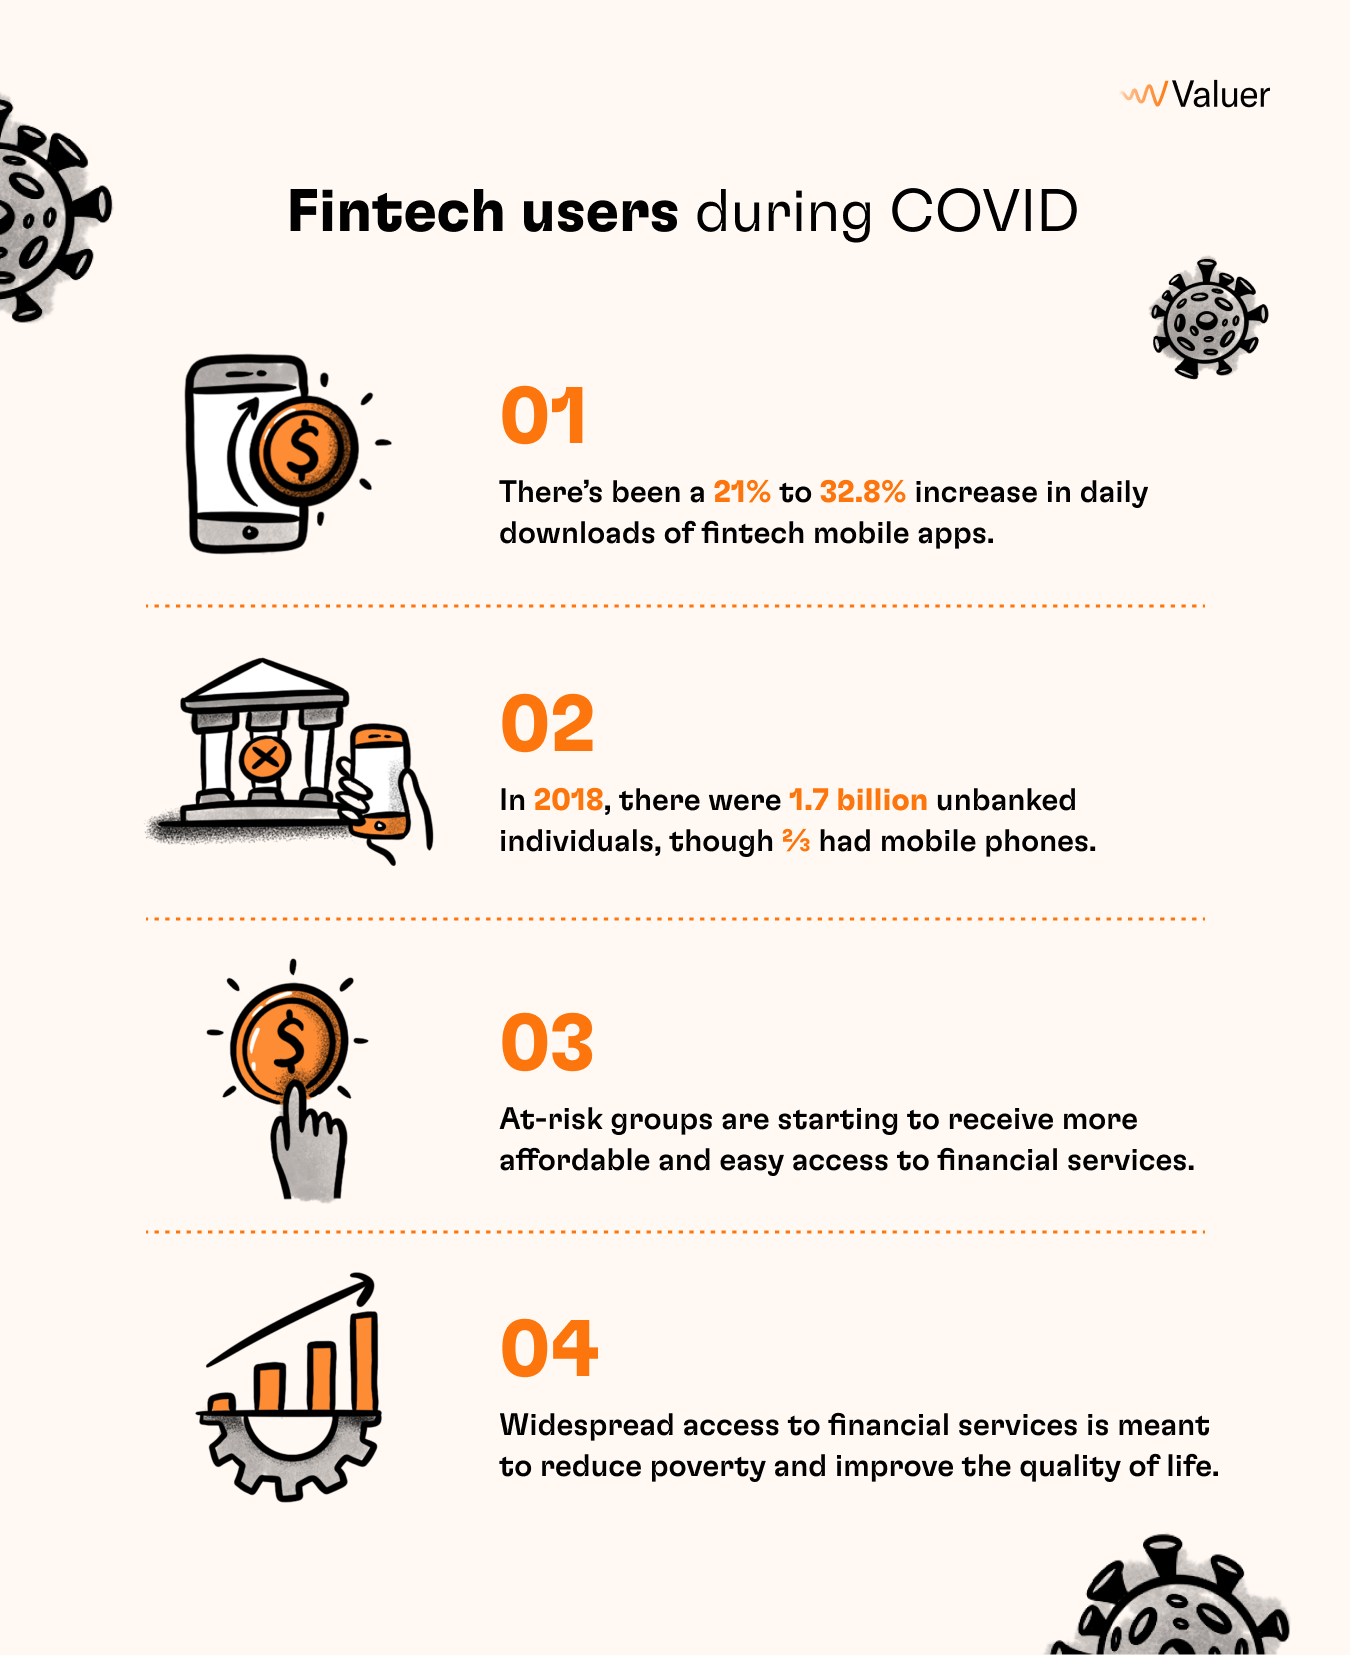 Fintech users during COVID